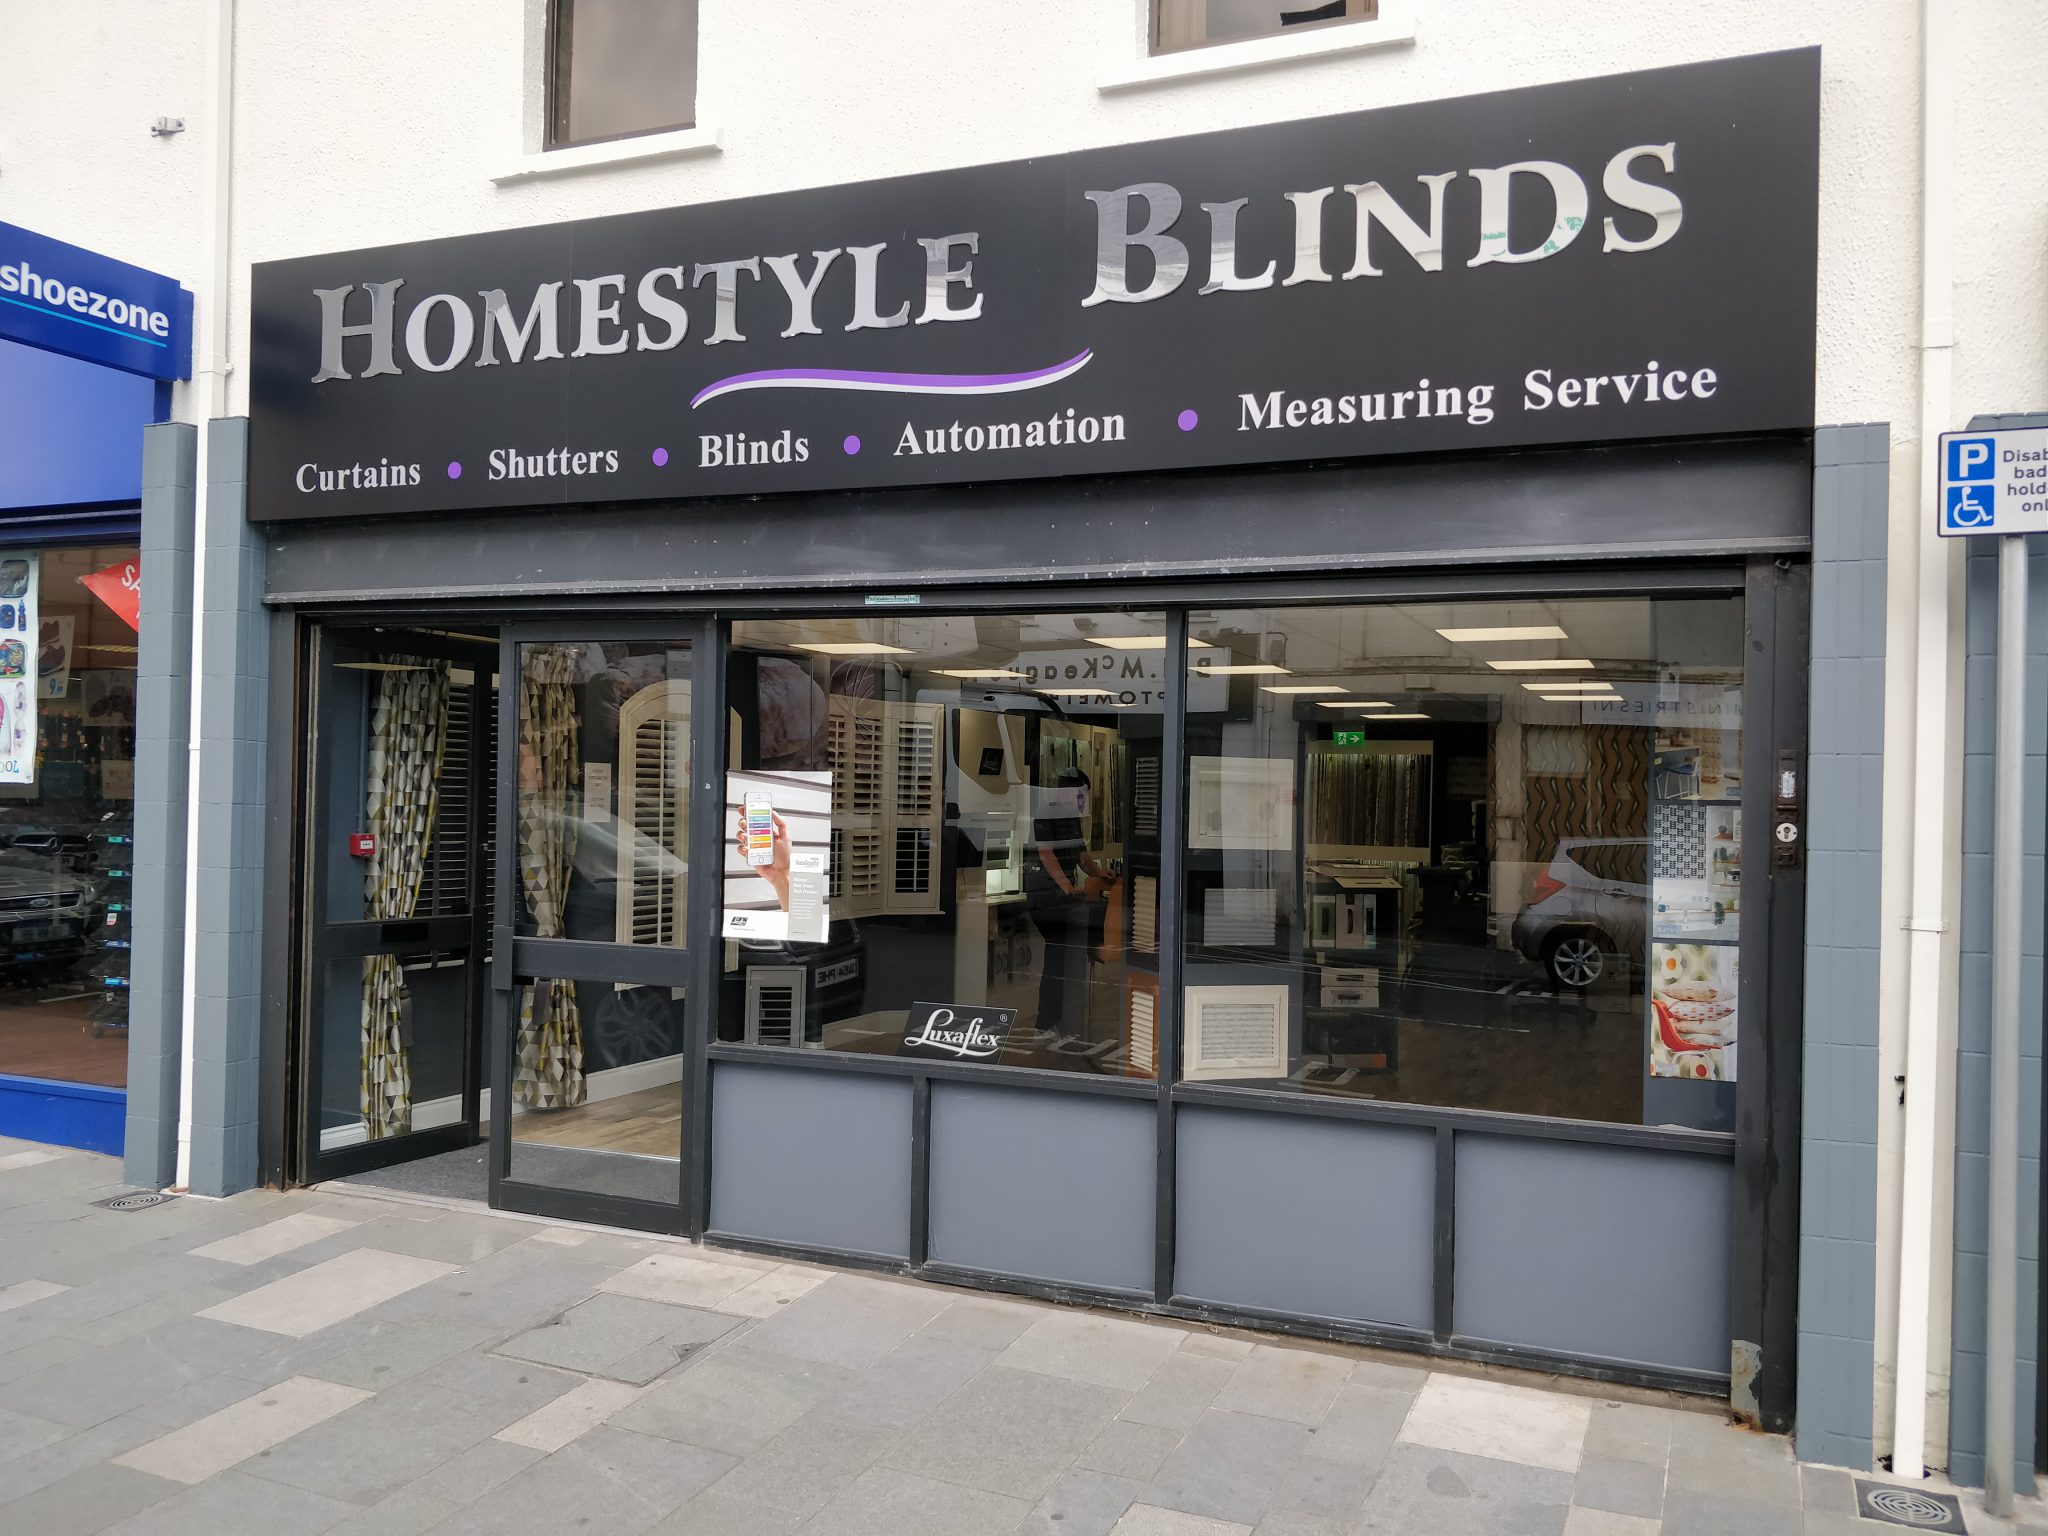 Town centre showroom for Homestyle Blinds